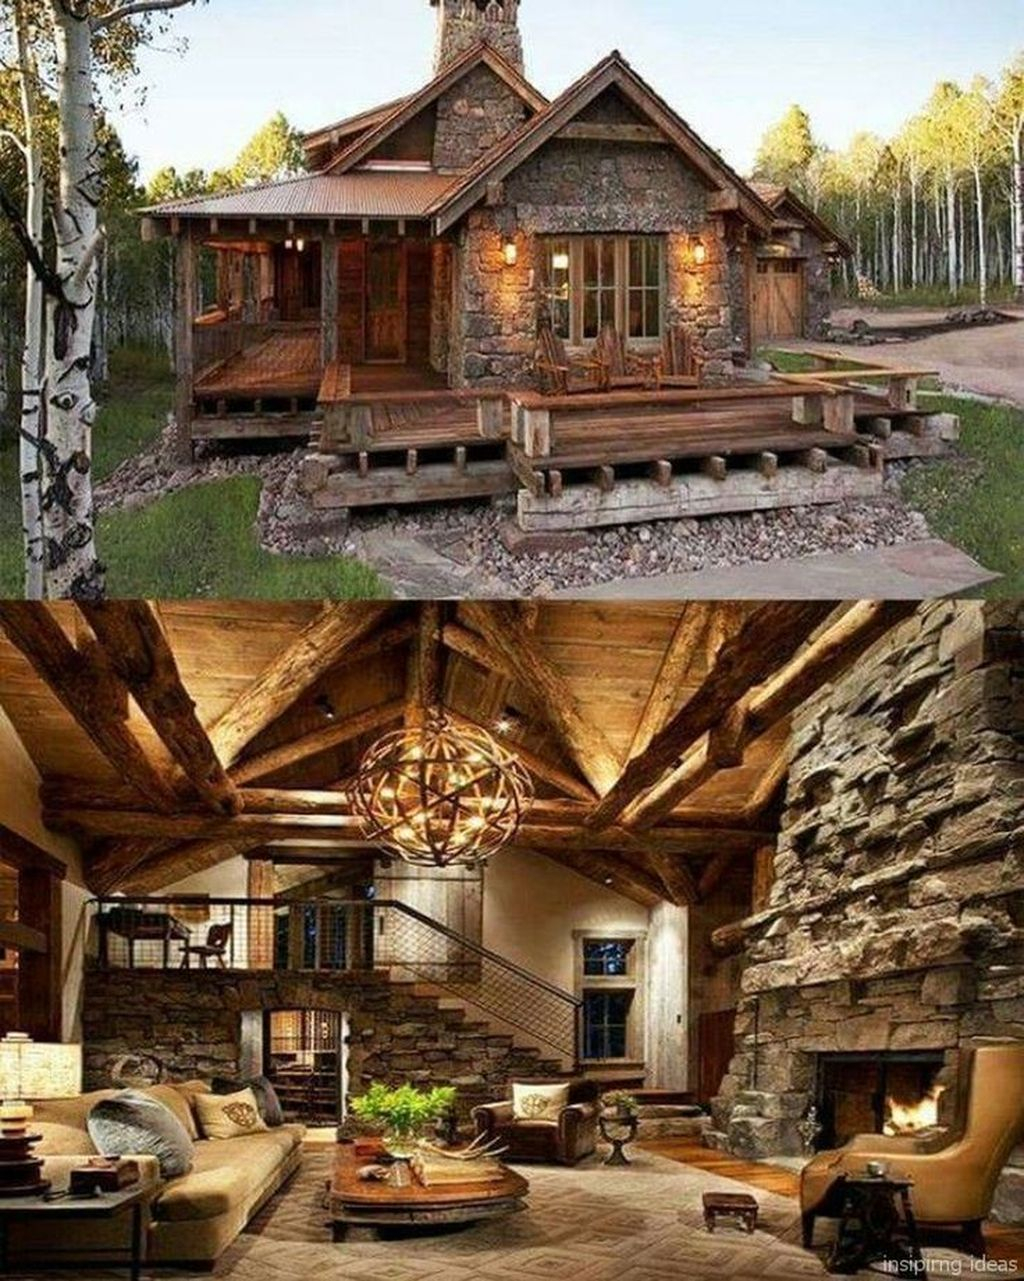 Gorgeous Log Cabin Style Home Interior Design20